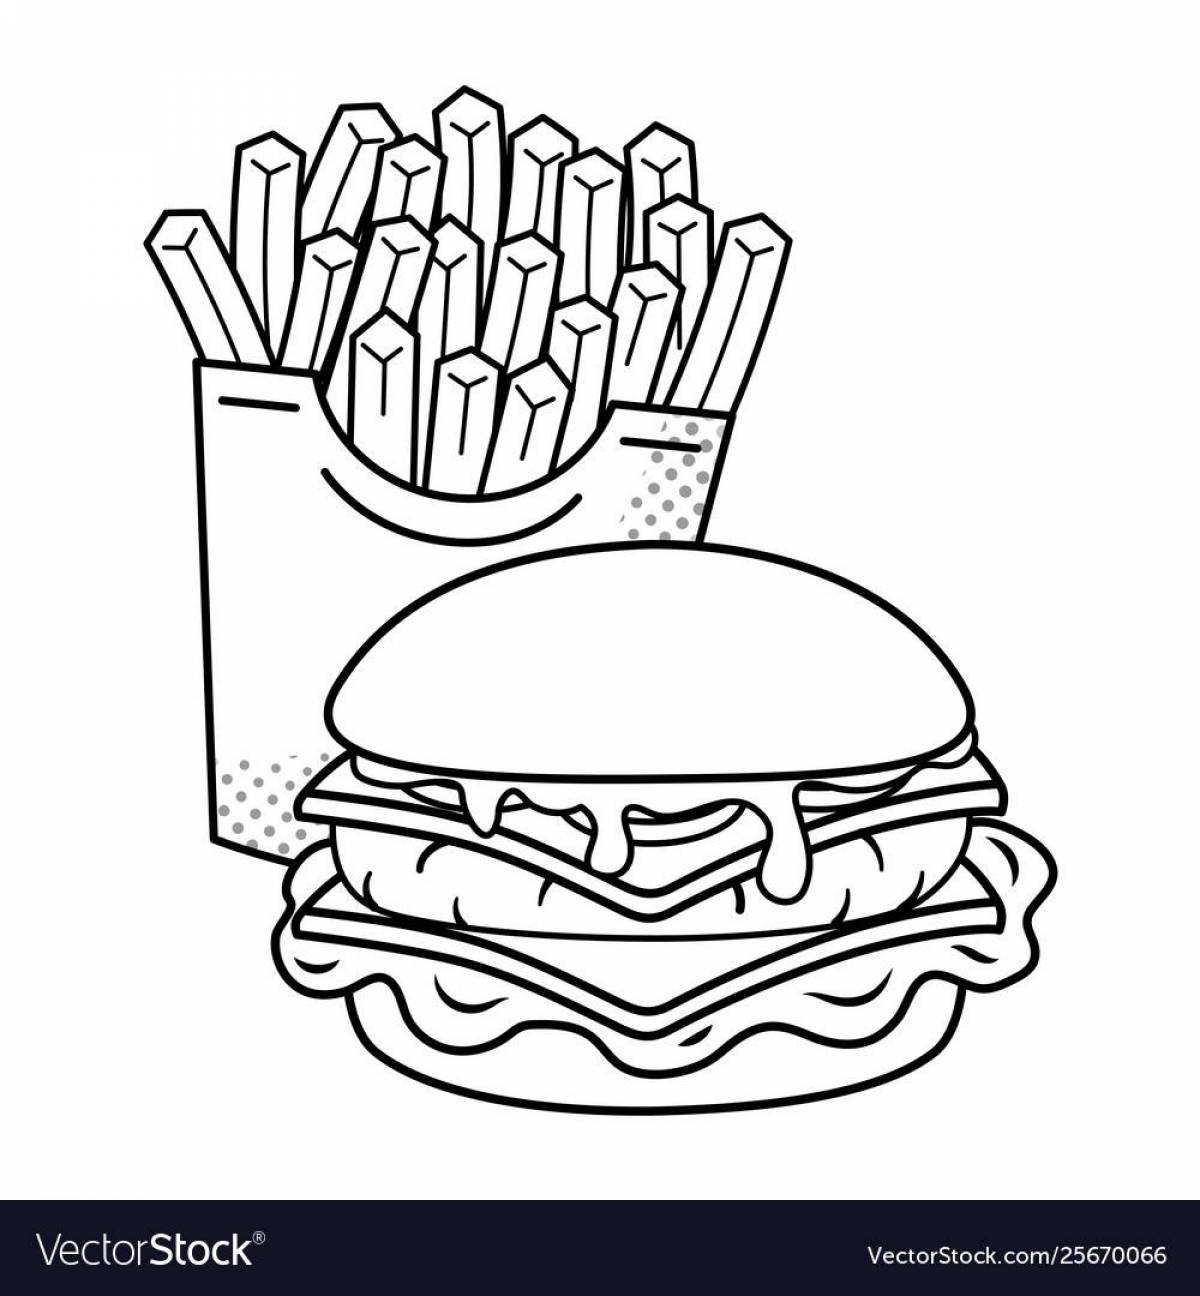 Spicy french fries coloring book